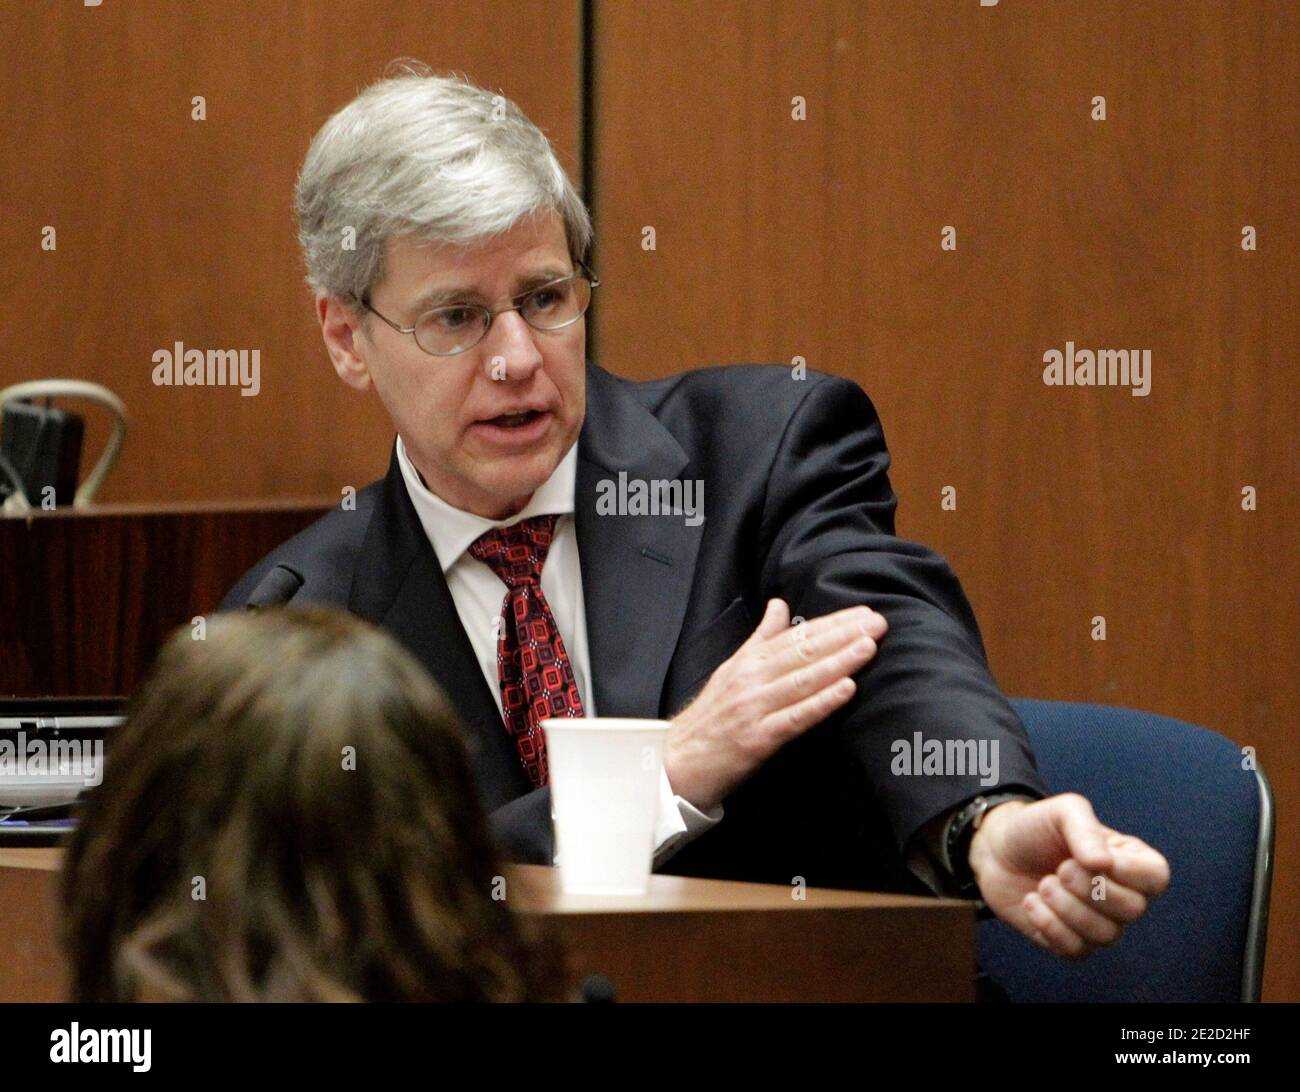 Anesthesiology expert Dr. Steven Shafer testifies during Dr. Conrad Murray's involuntary manslaughter trial in Los Angeles on October 20, 2011. Murray has pleaded not guilty and faces four years in prison and the loss of his medical license if convicted of involuntary manslaughter in Michael Jackson's death. Photo by Reed Saxon/Pool/ABACAPRESS.COM Stock Photo